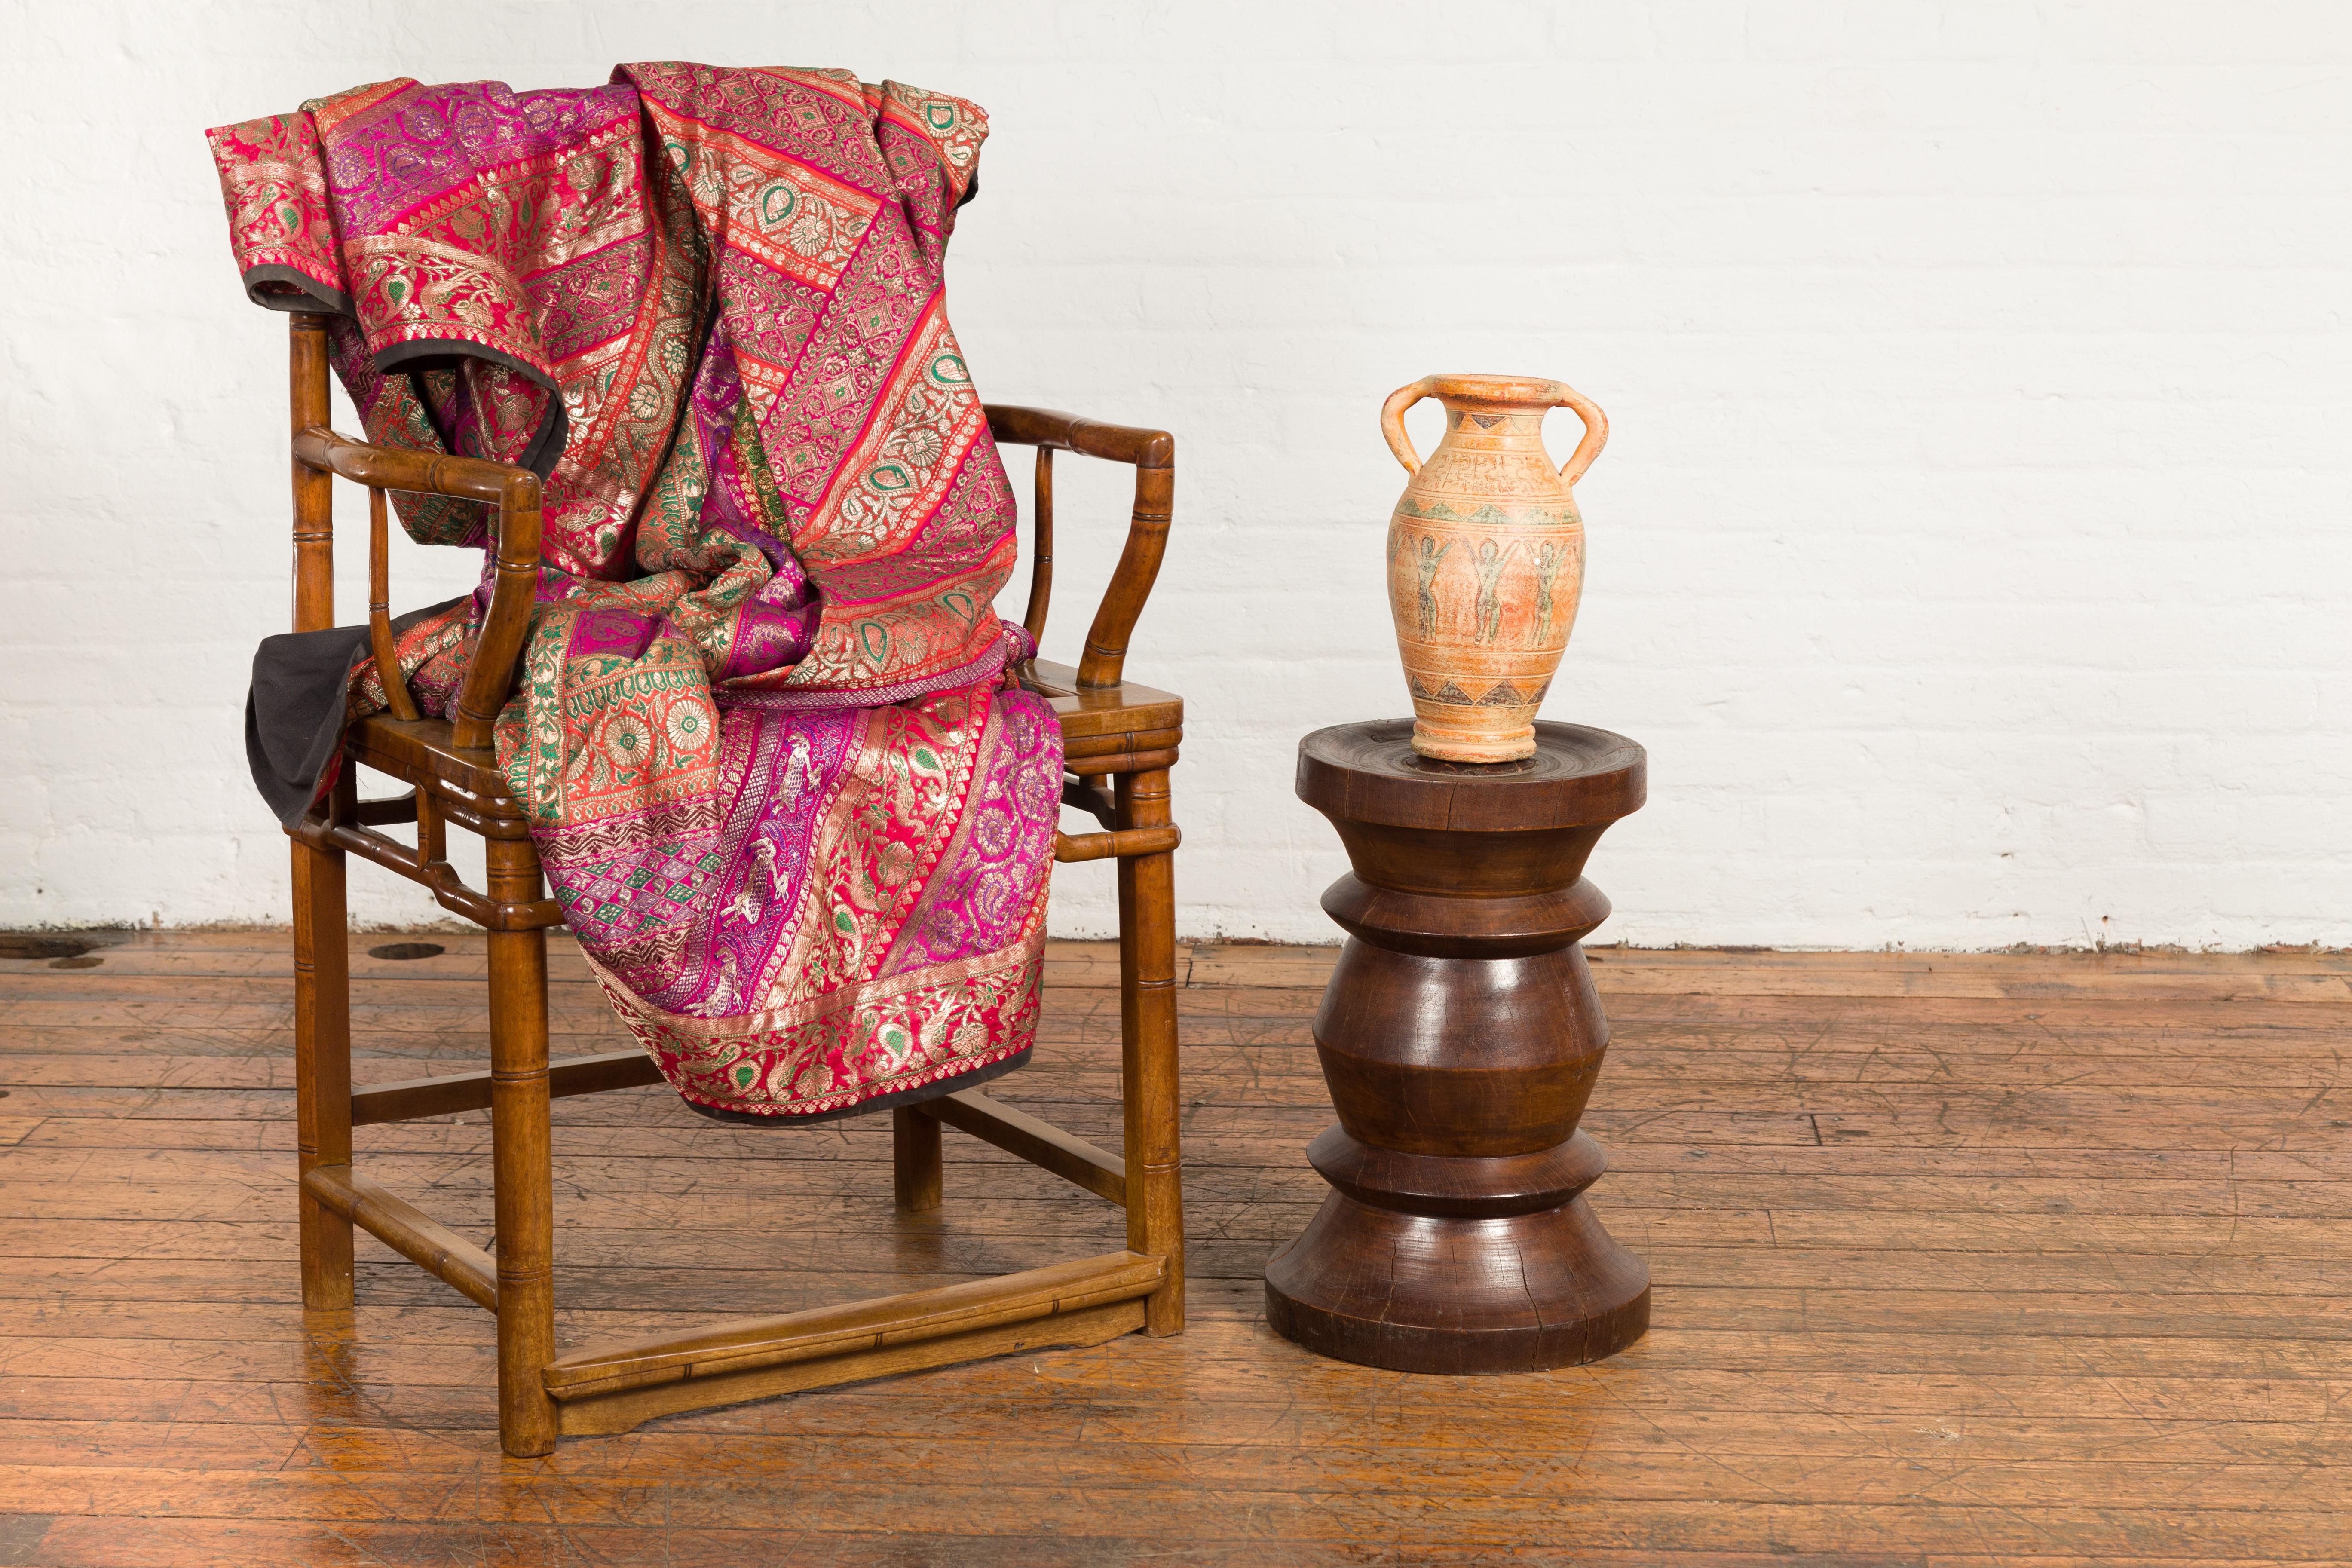 An Indonesian turned wooden stool from the 19th century with brown patina. Crafted in Indonesia during the 19th century, this stool is made of solid turned wood. Showcasing an hourglass reminiscent shape, the stool is topped with a circular seat